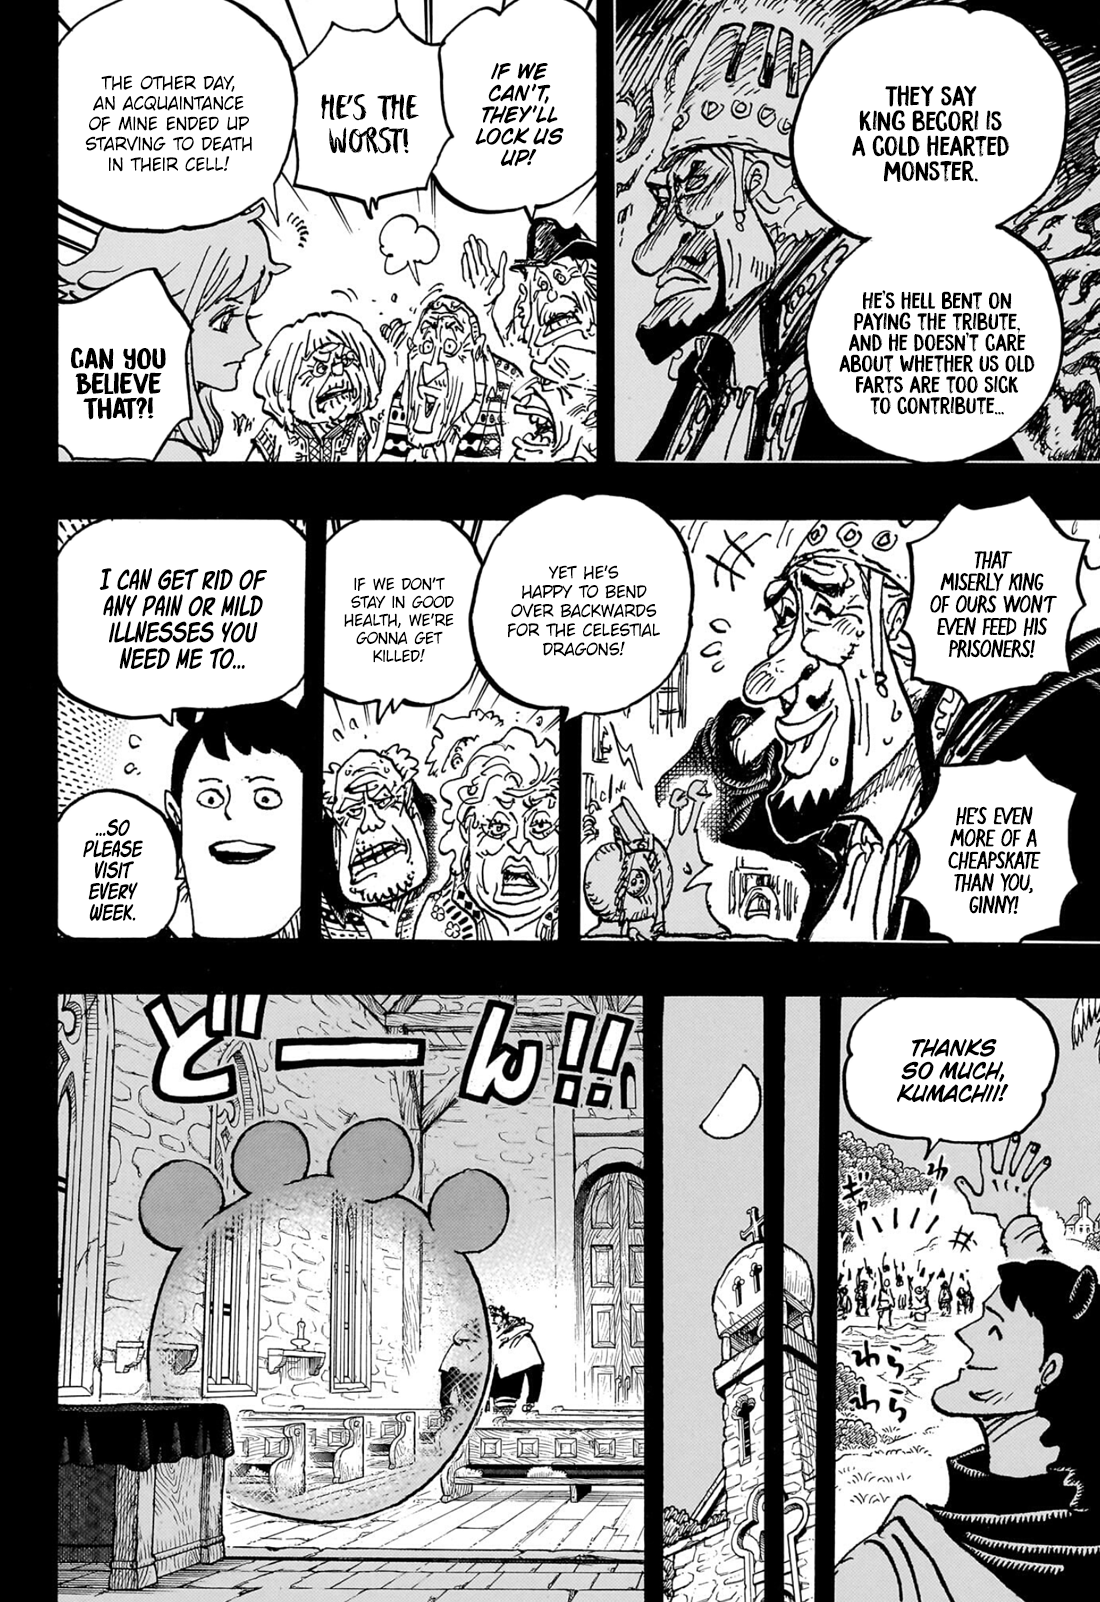 One Piece: Chapter 1061 - Theories and Discussion : r/OnePiece